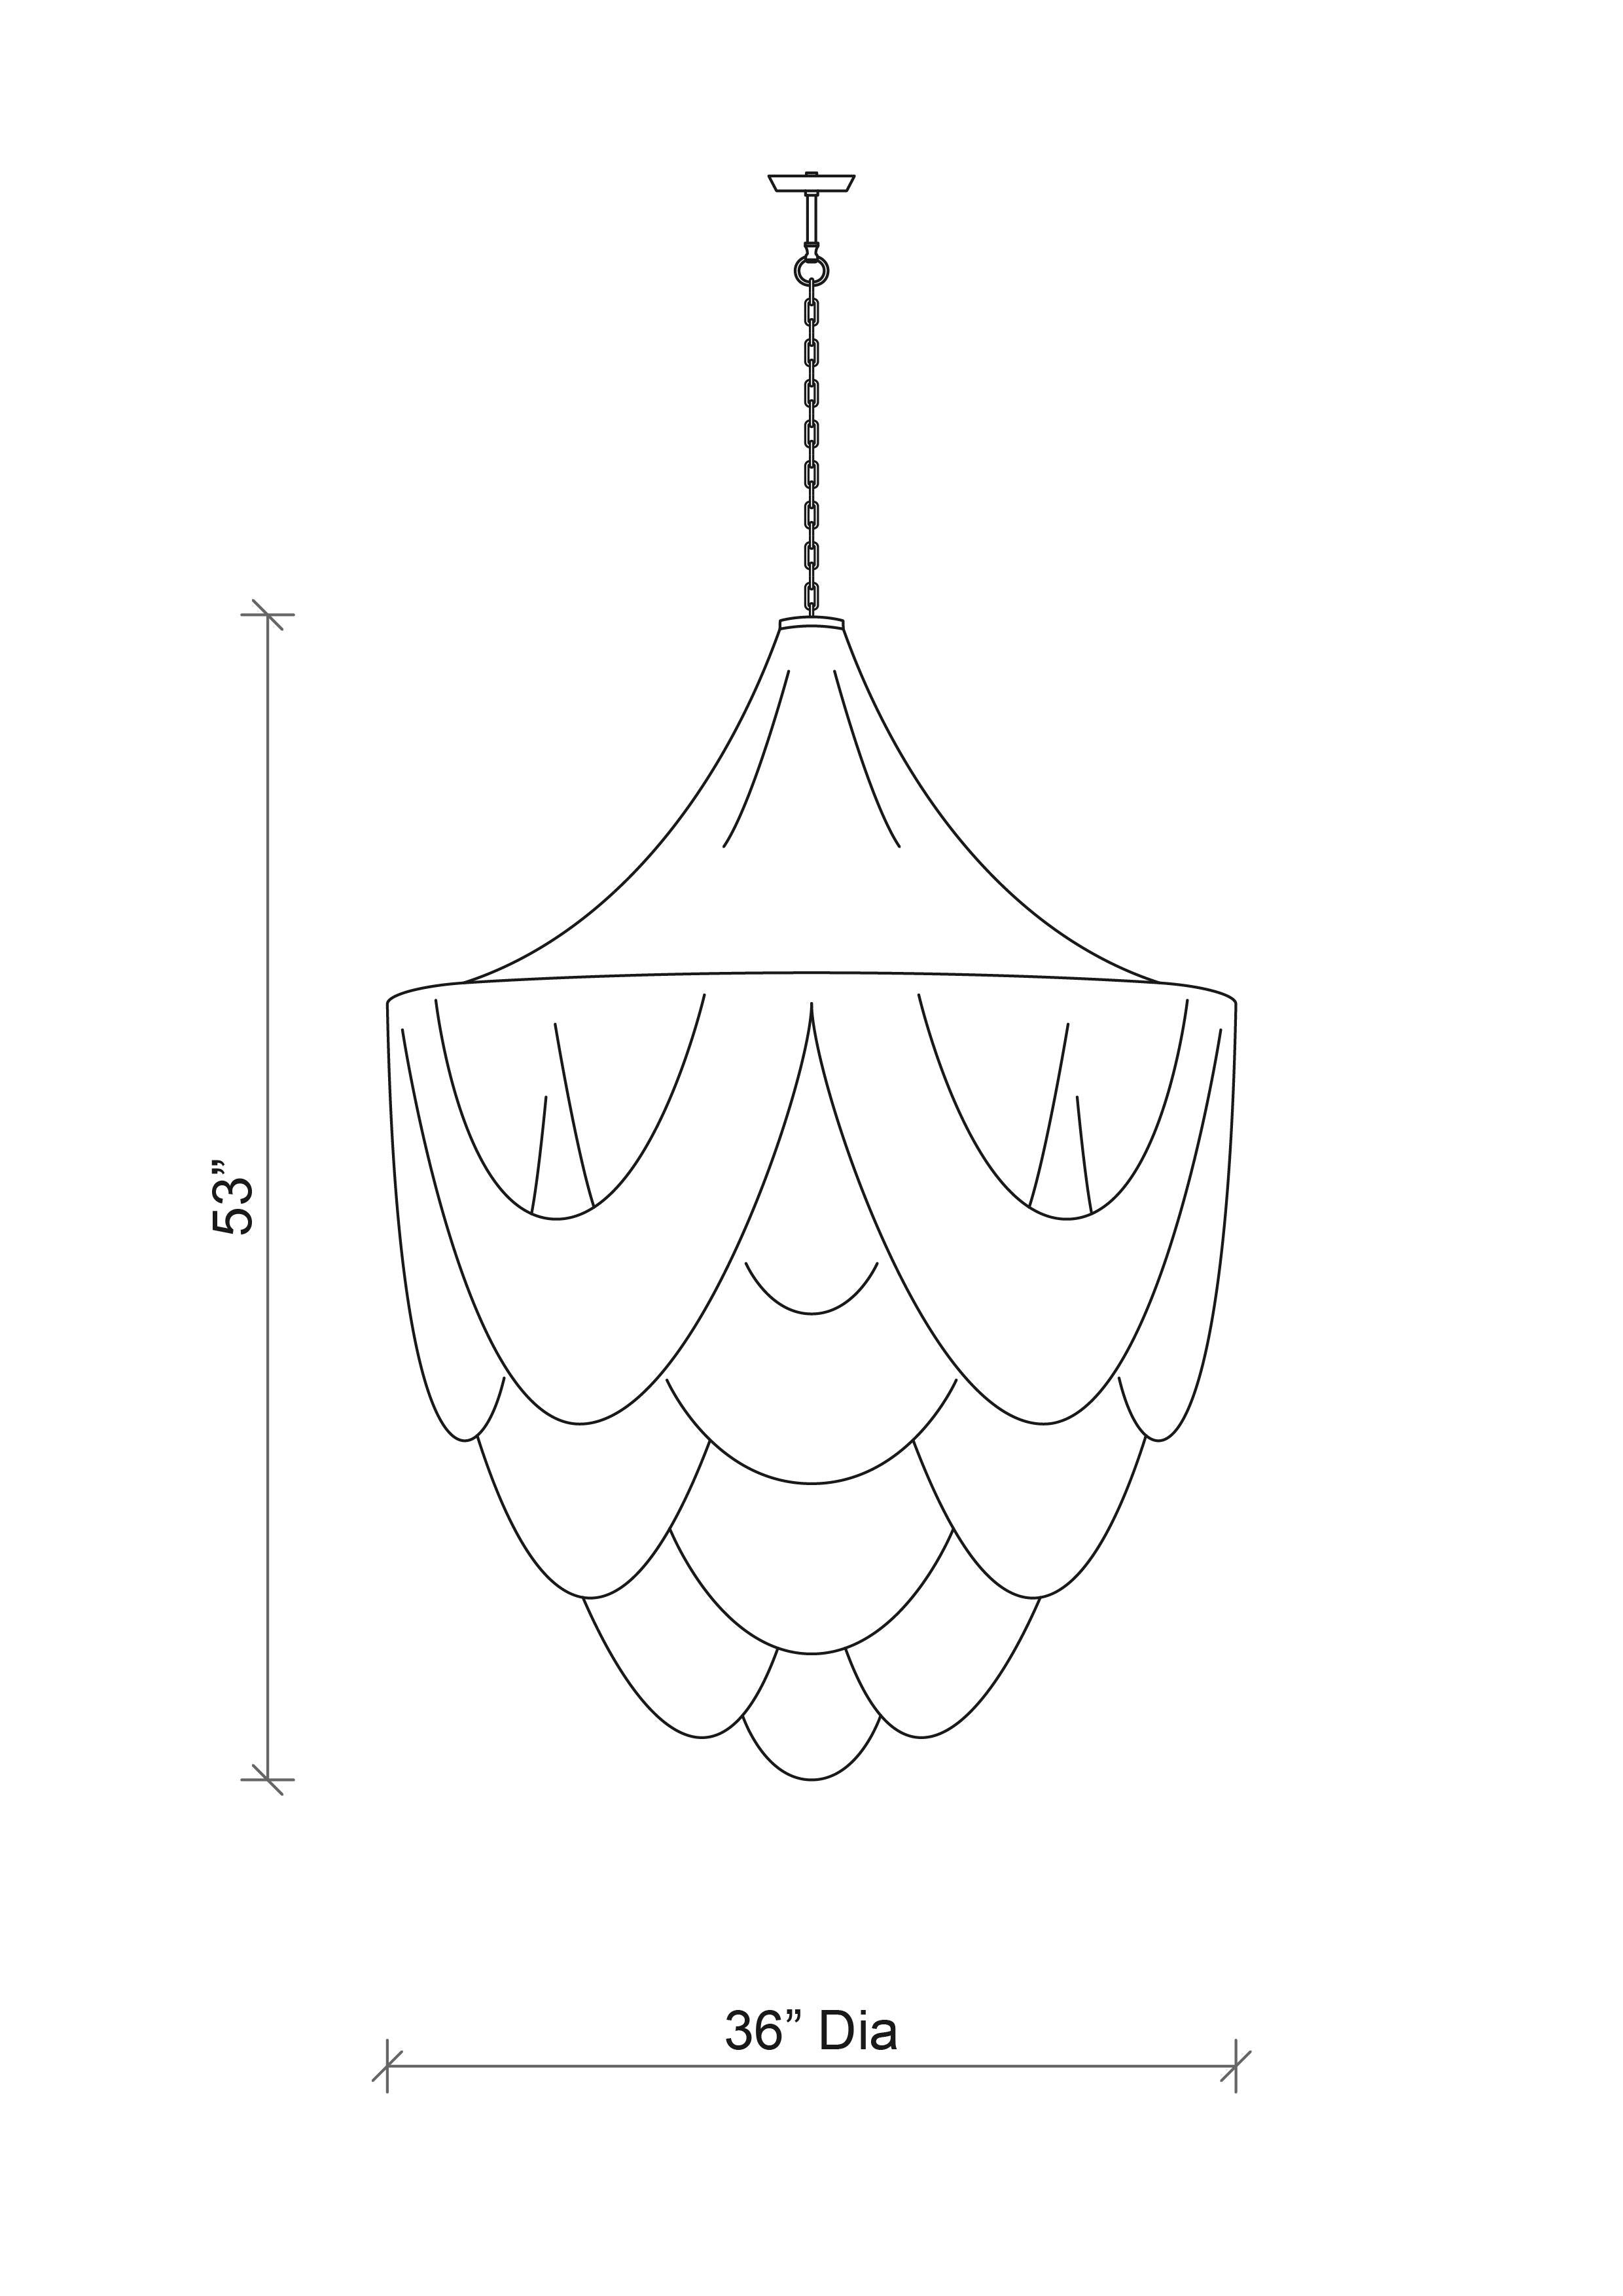 Extra Large Round Whisper with Crown Leather Chandelier in Premium Leather